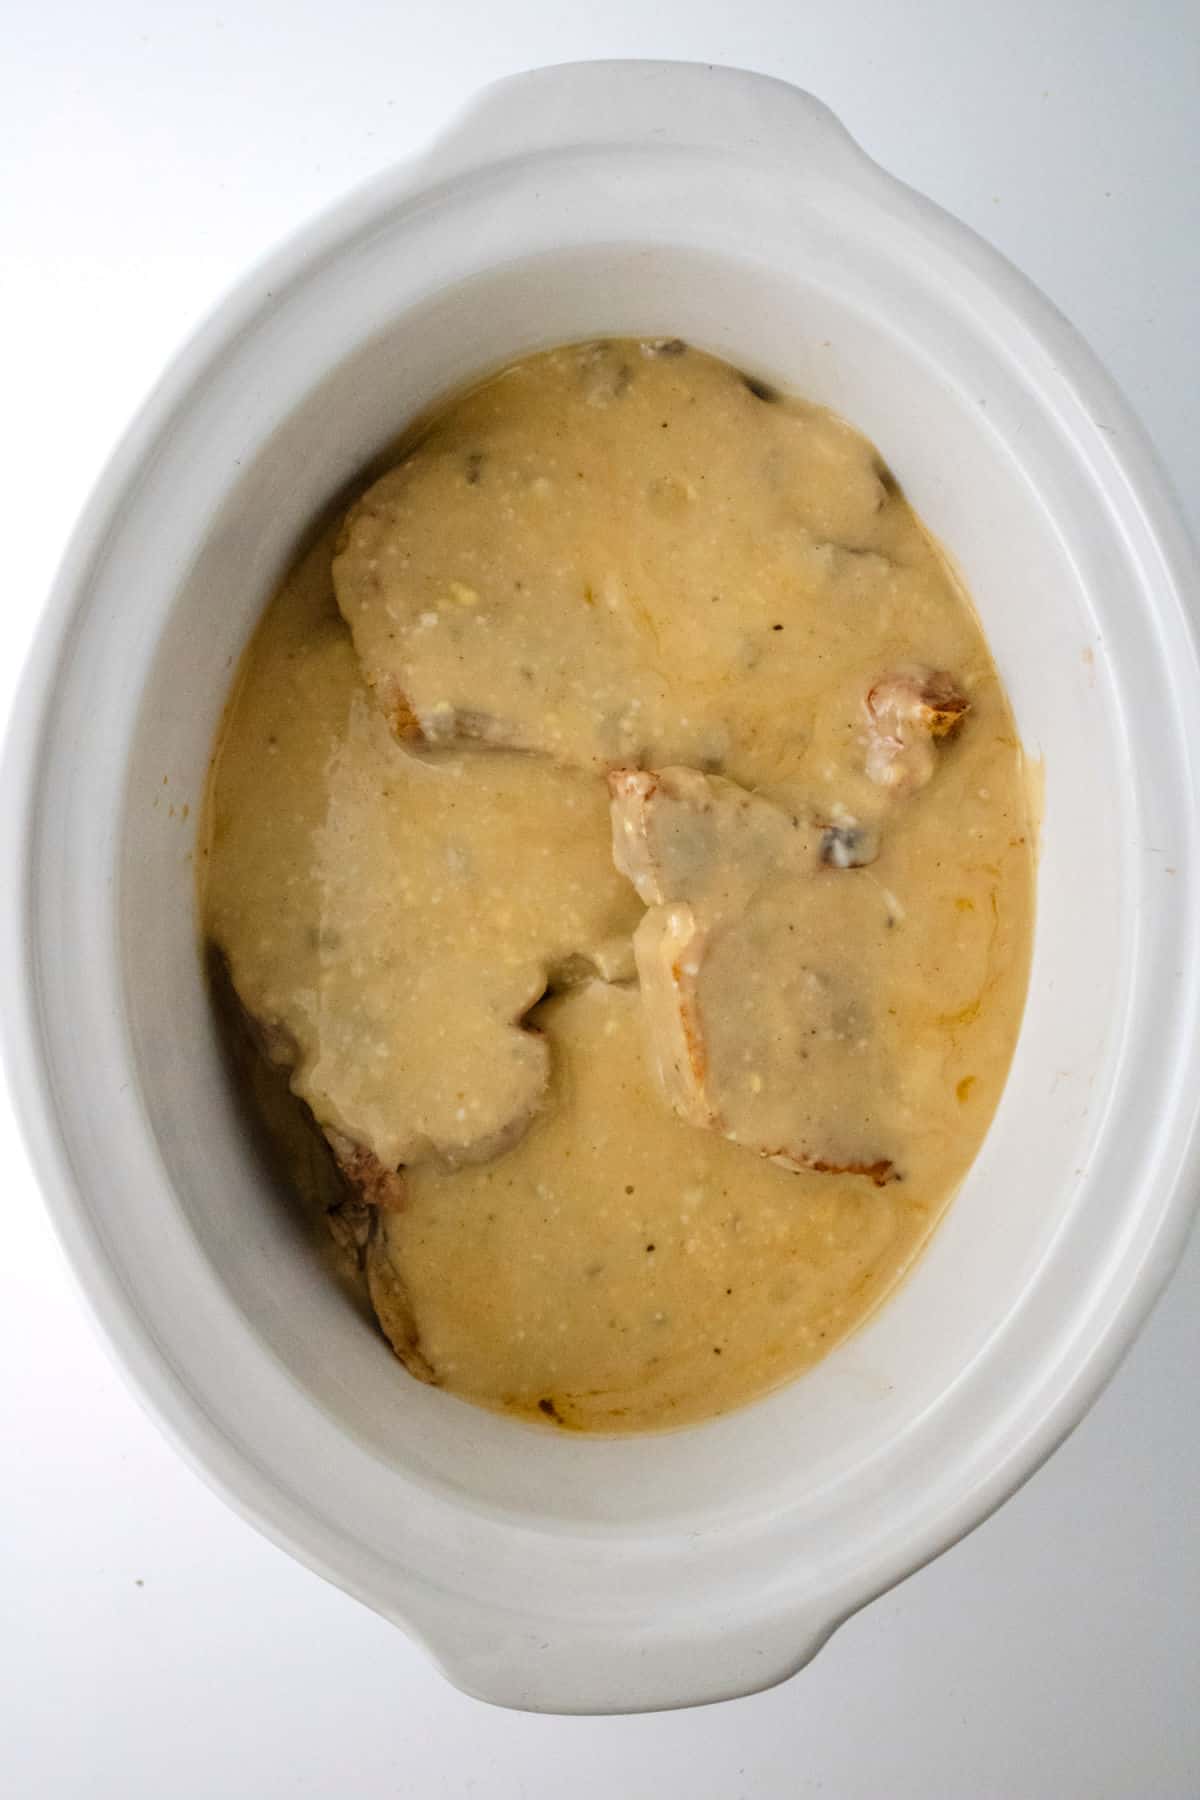 Pork chops topped with gravy in a white crock pot.